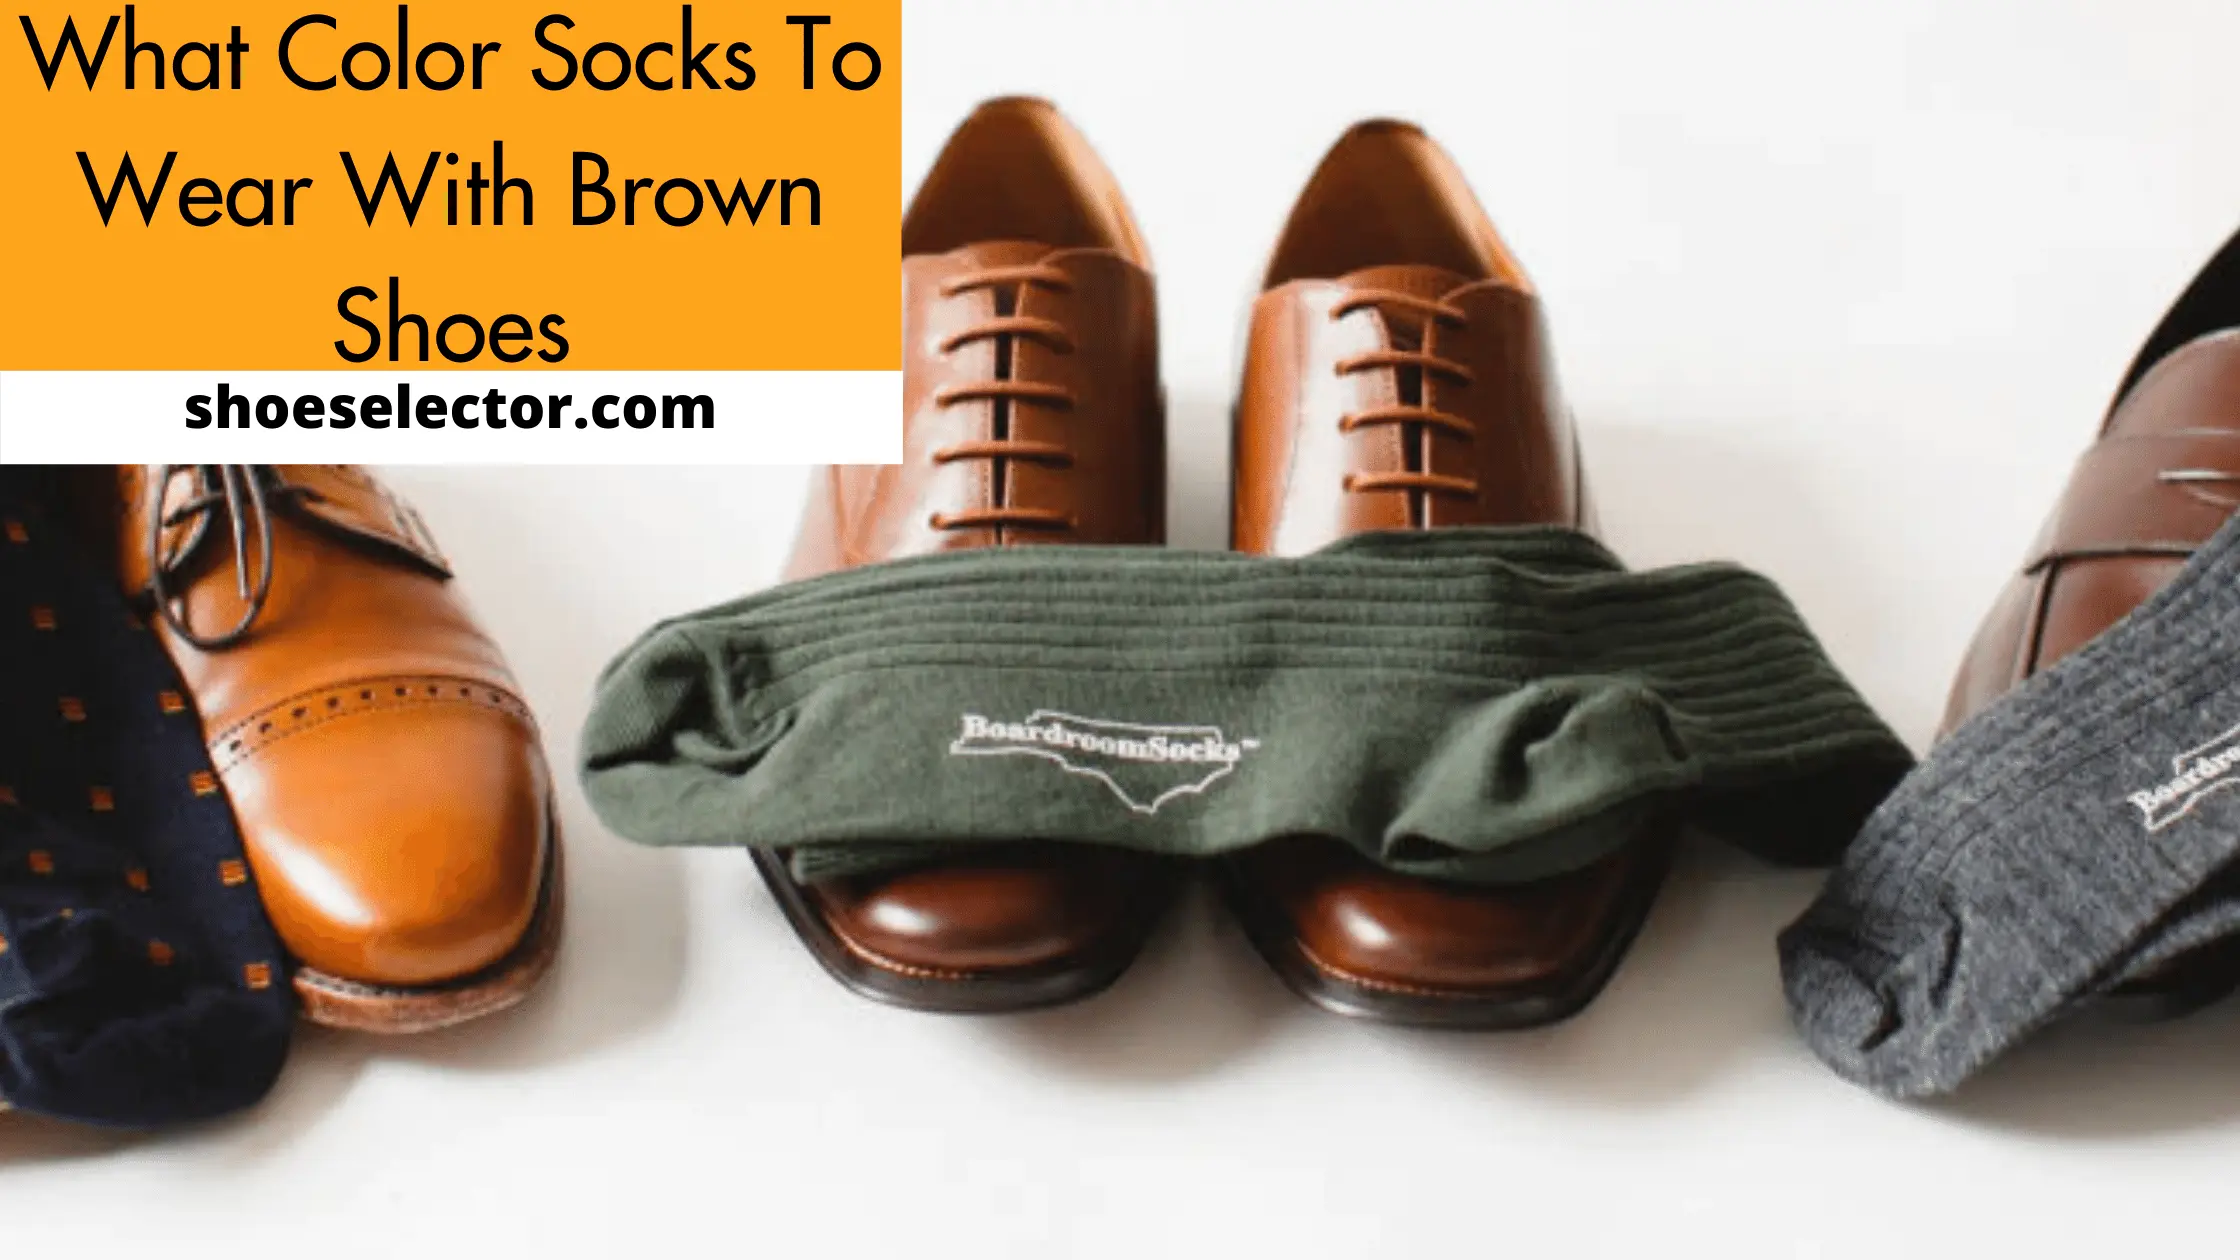 What Color Socks To Wear With Brown Shoes? - #1 Solution